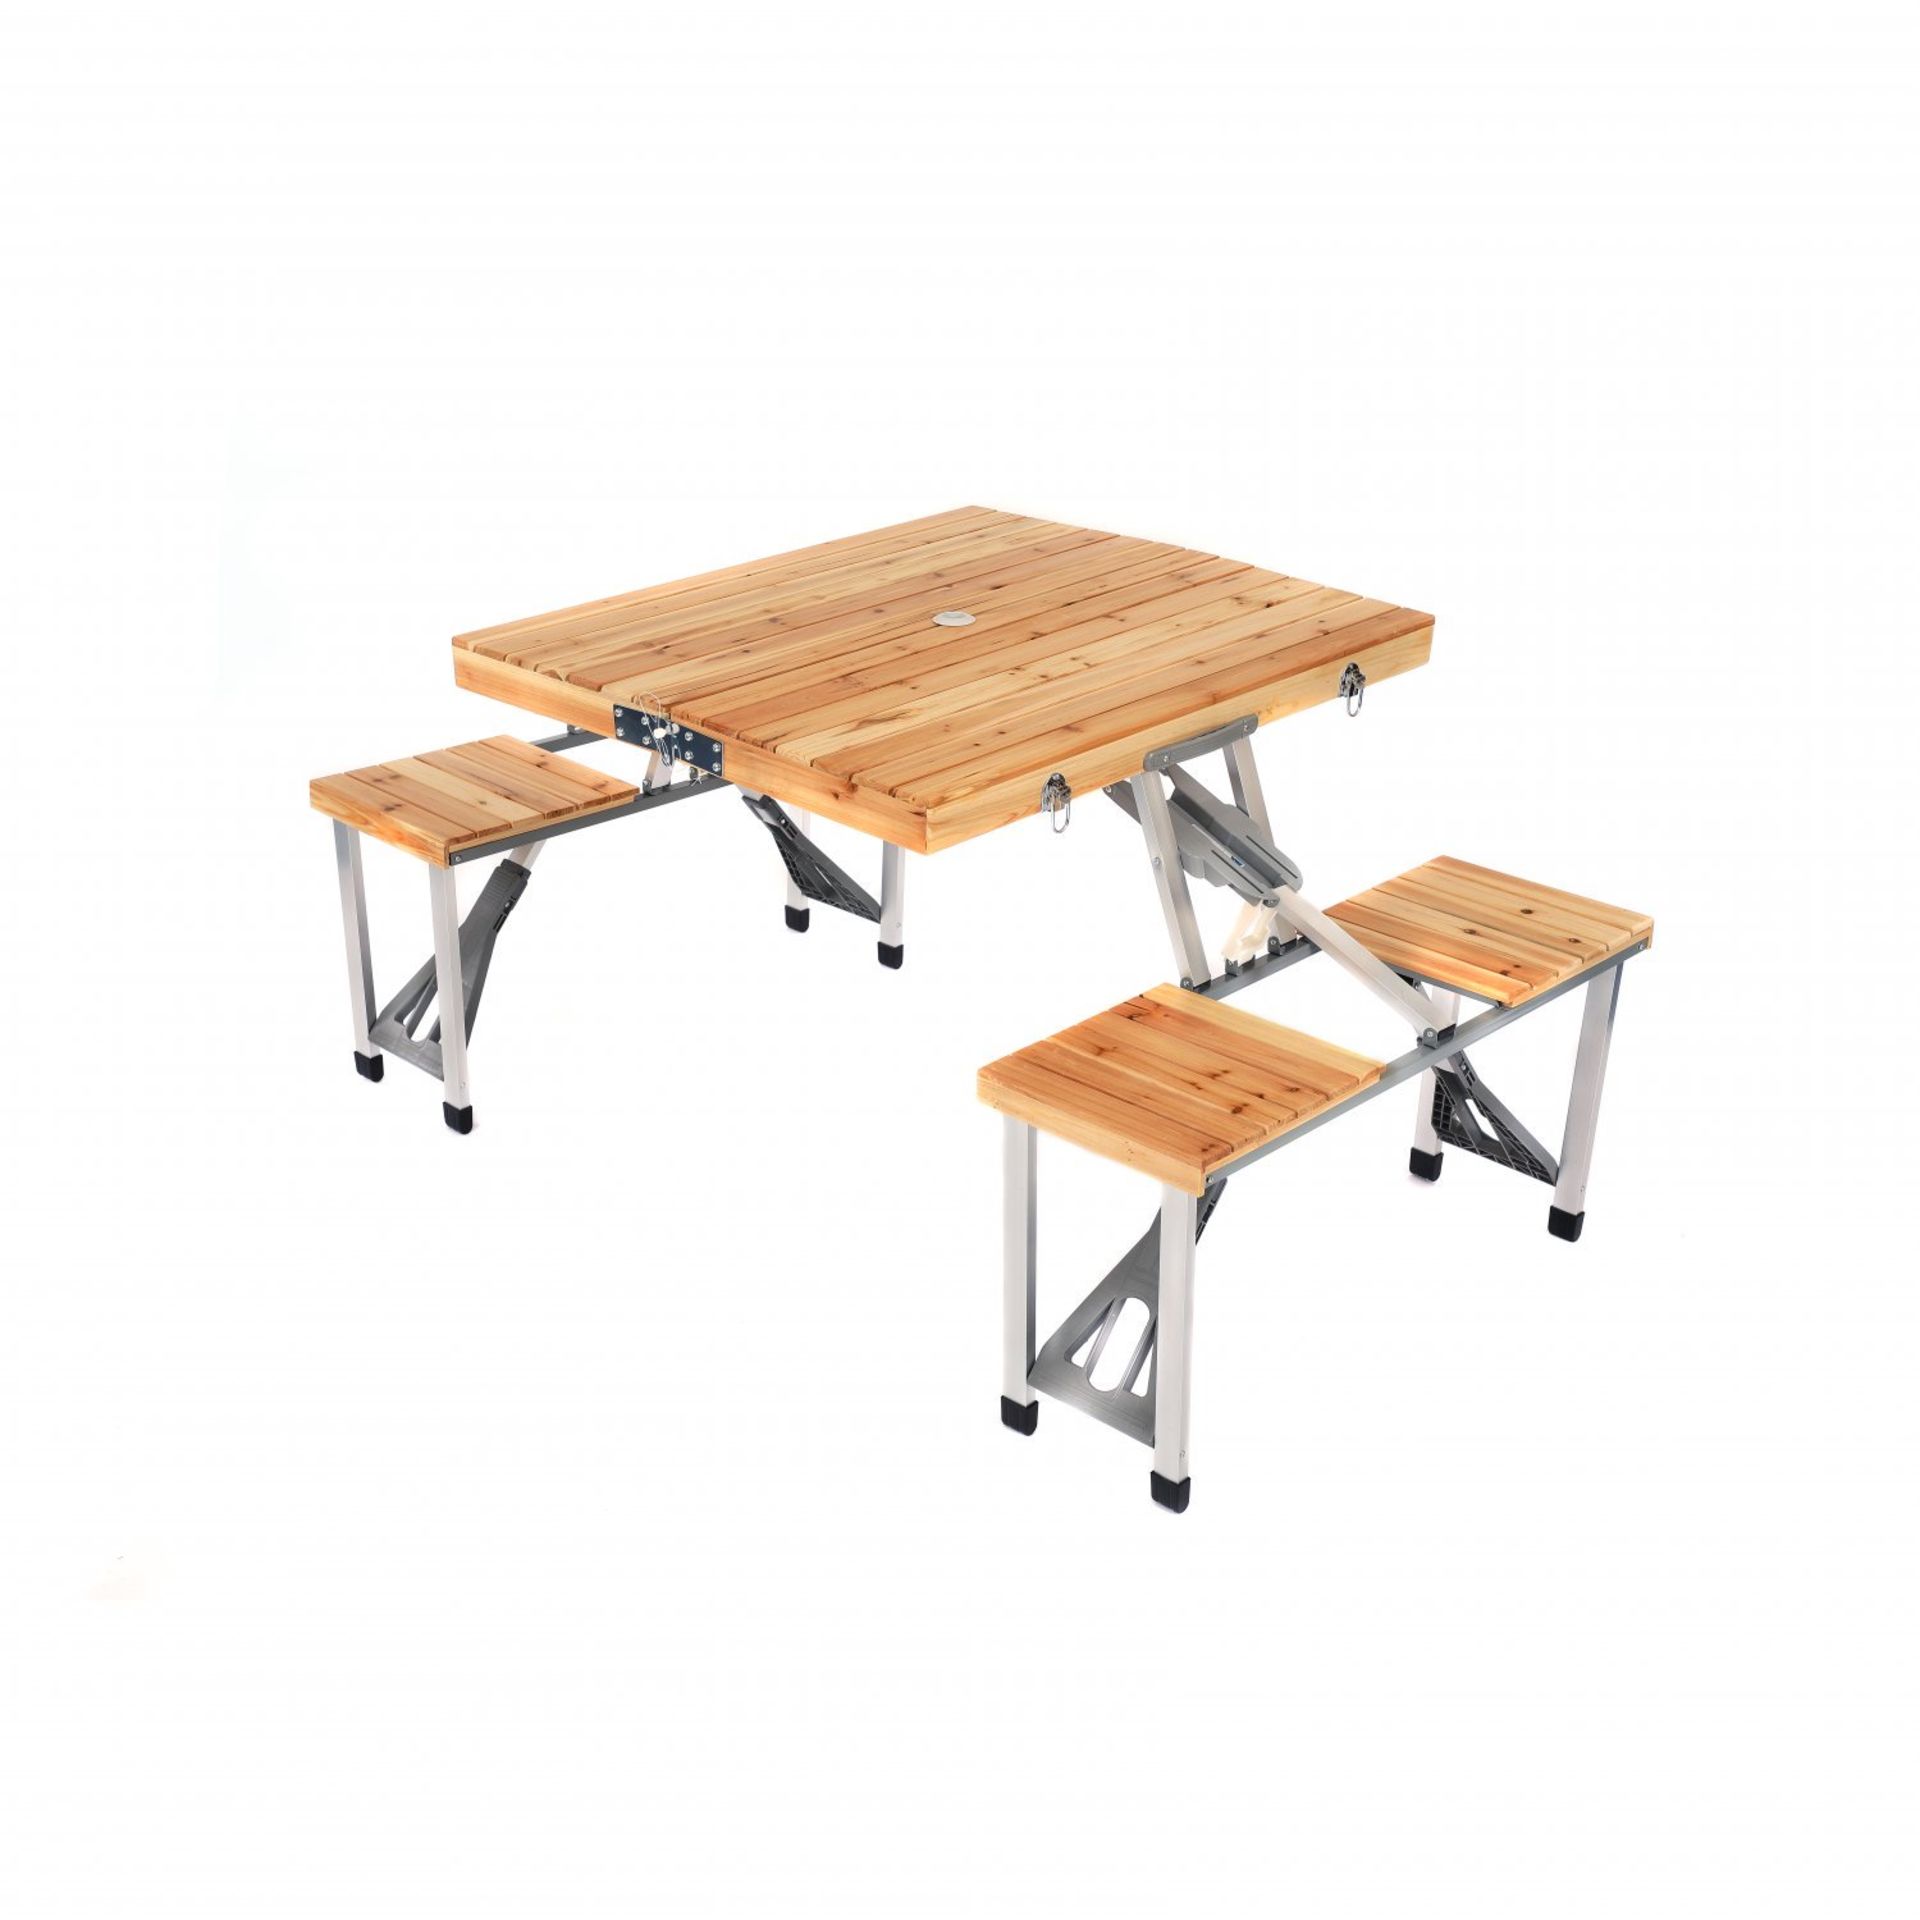 (F49) Wooden Folding Outdoor Picnic Table and Bench Set 4 Seats Open Dimensions: 134 x 82 x 66...